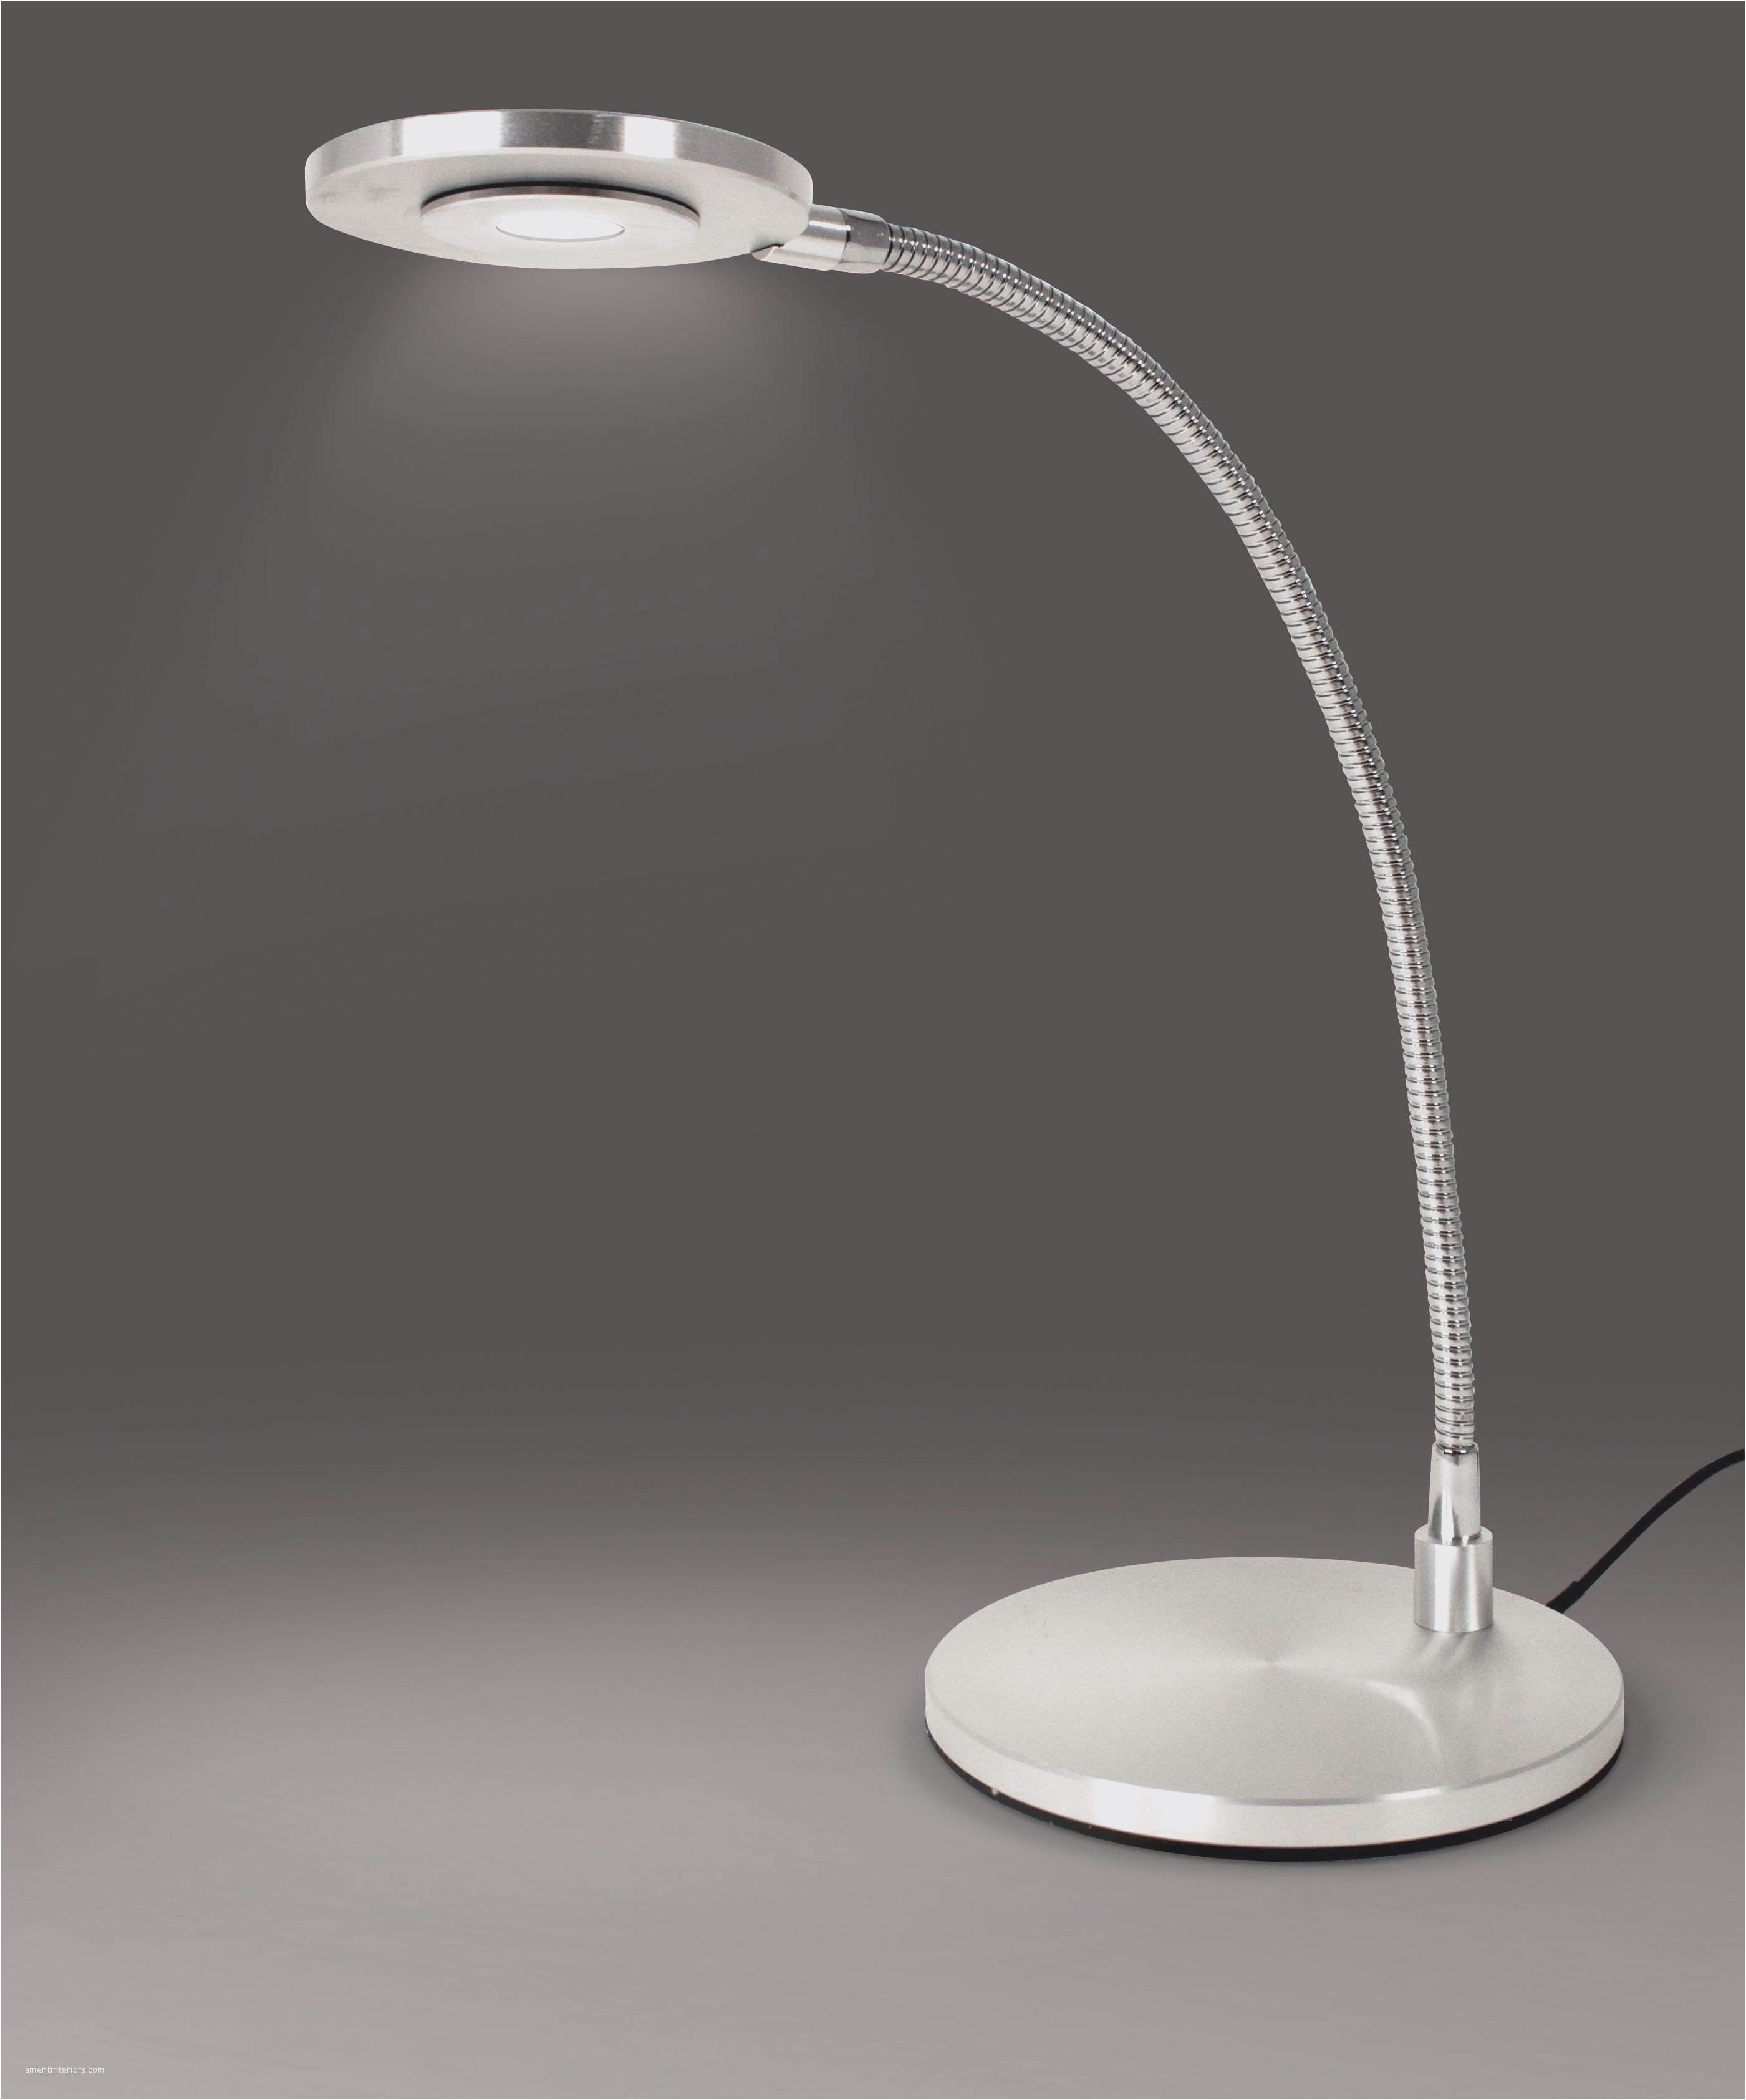 lampscool home depot desk lamp decoration ideas collection lovely and interior decorating cool home